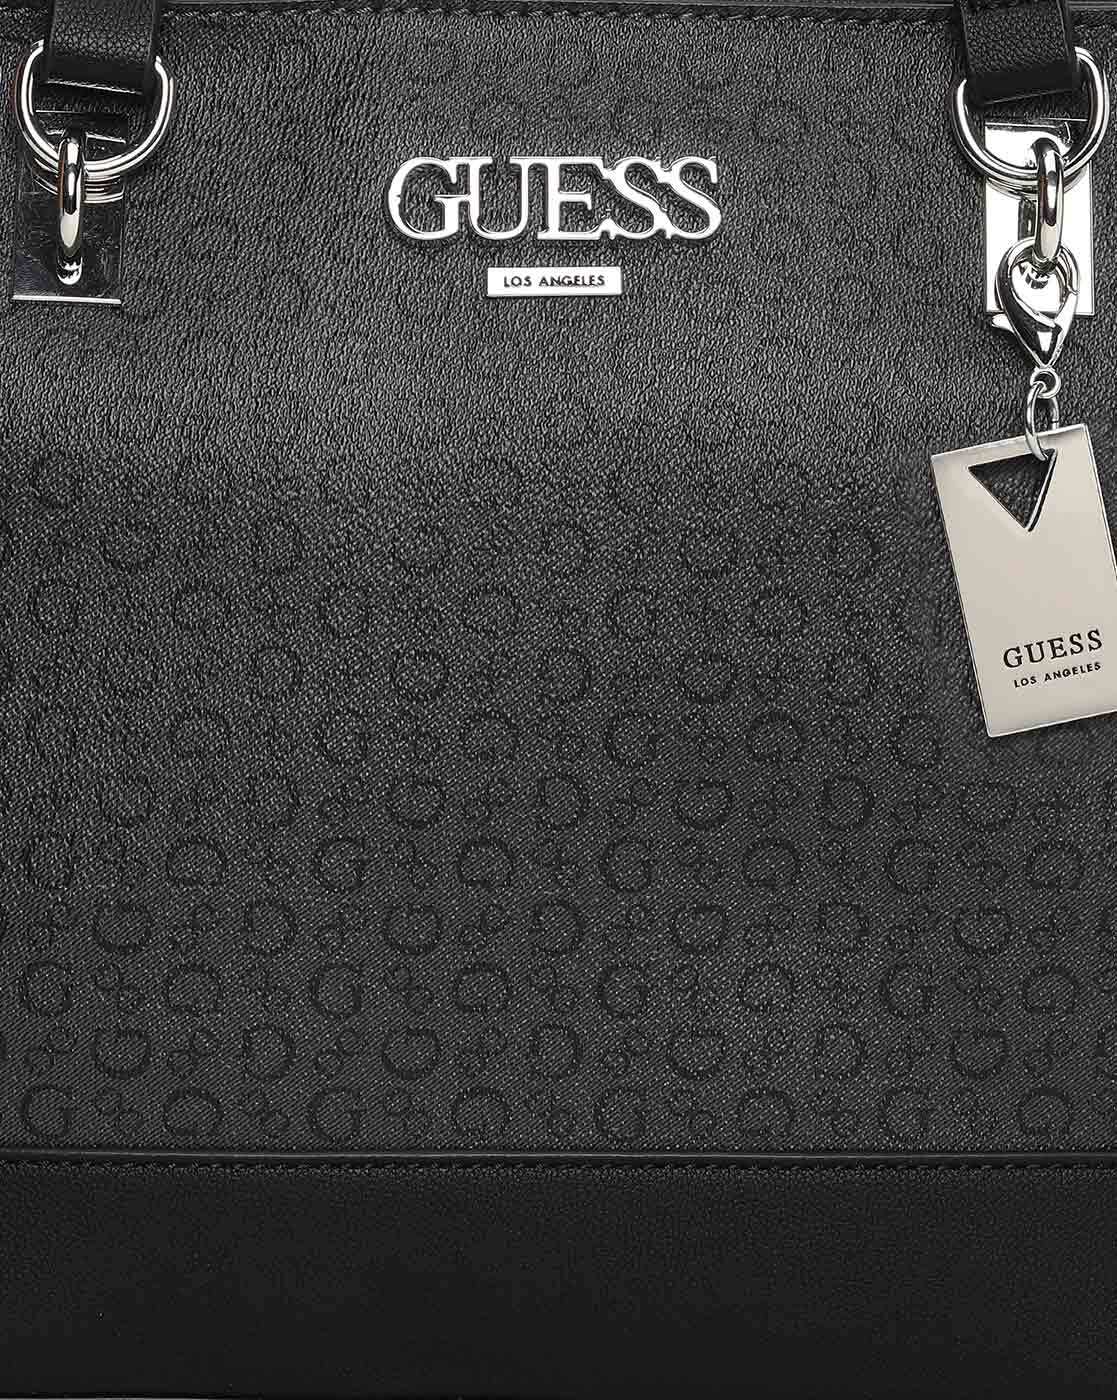 Guess Handbags - Luggage And Bags - AliExpress